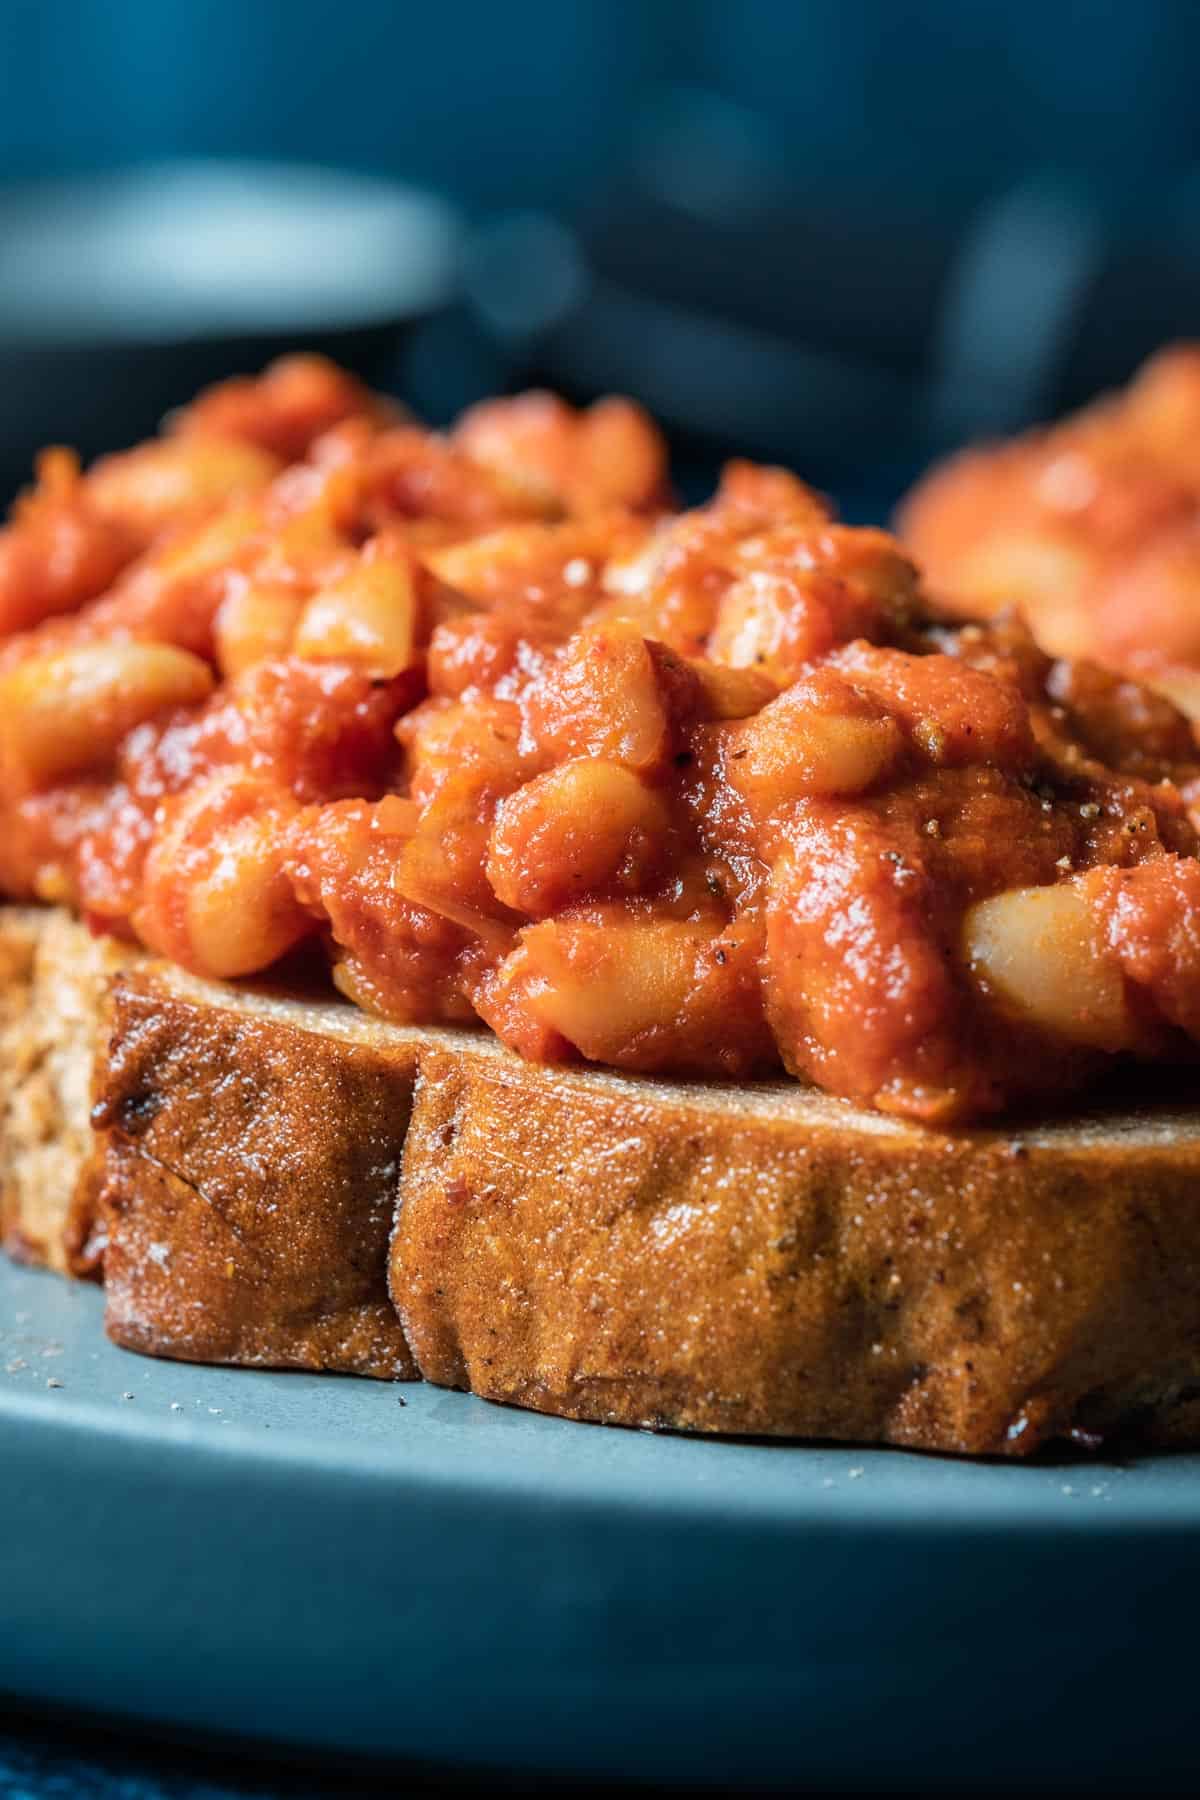 Toast topped with baked beans on a blue plate.